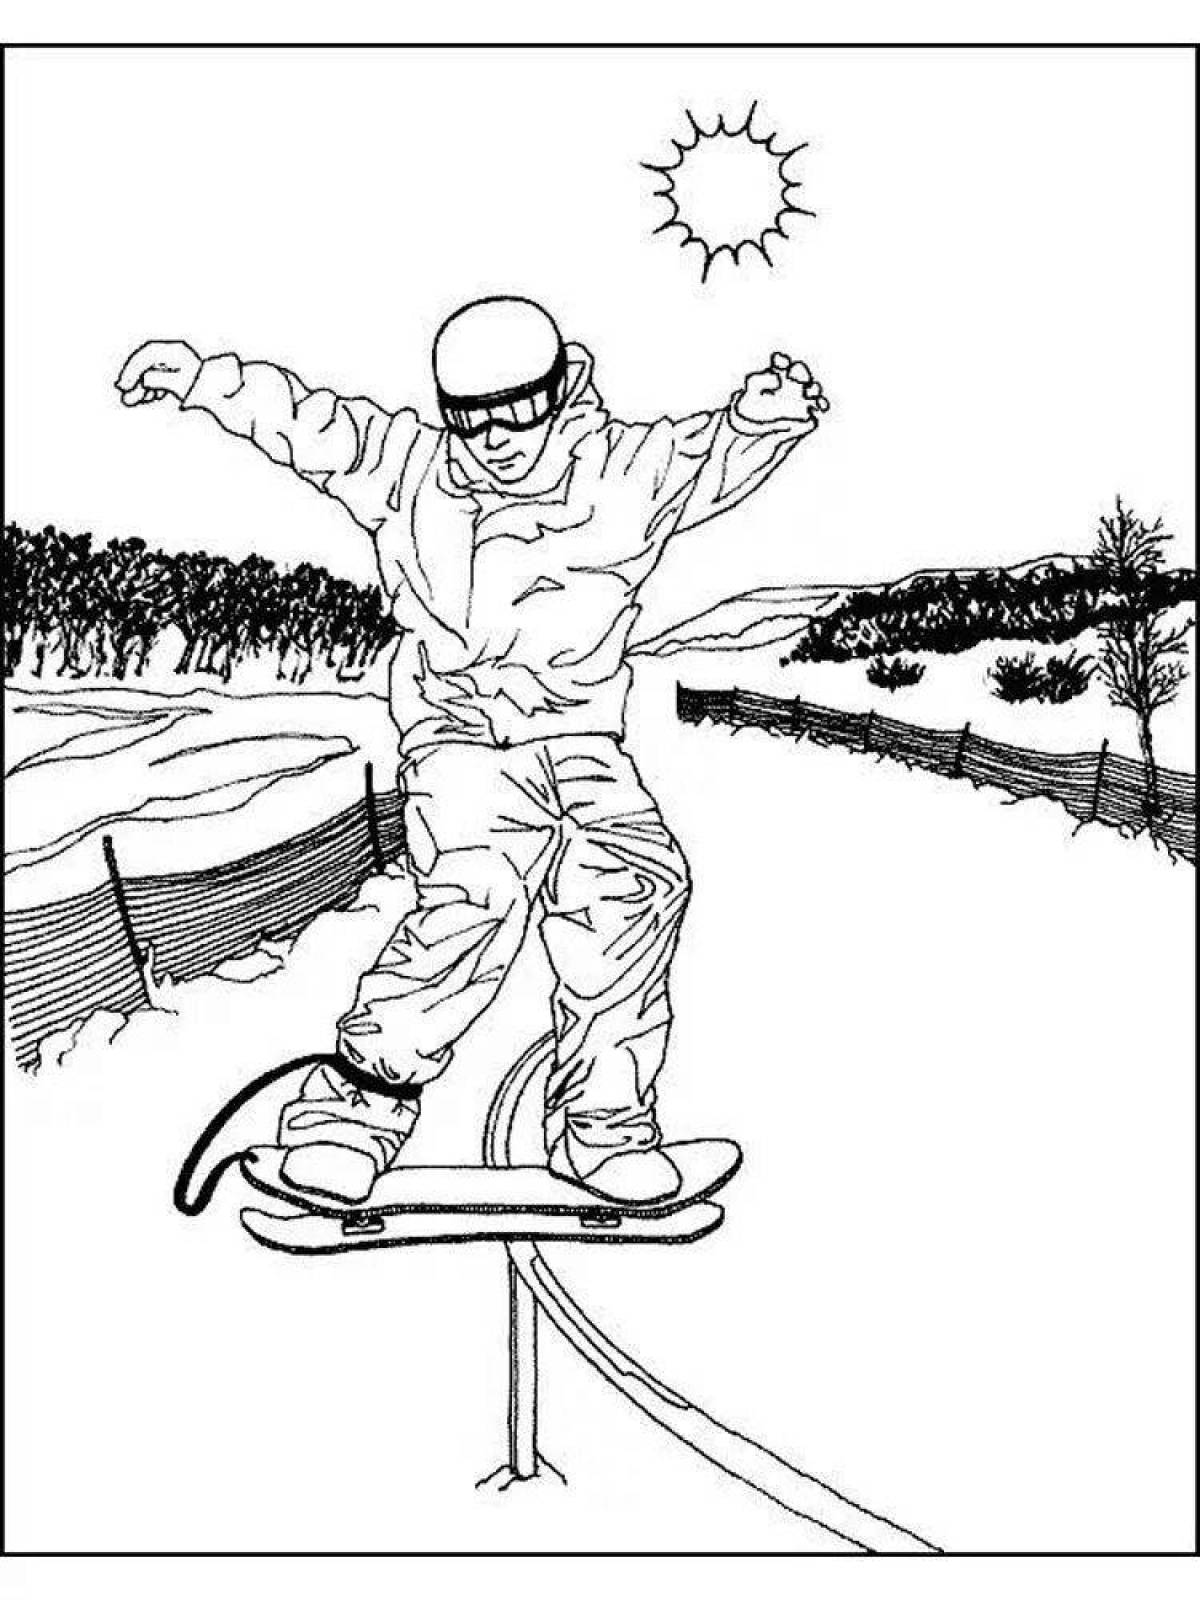 Funny snowboard coloring book